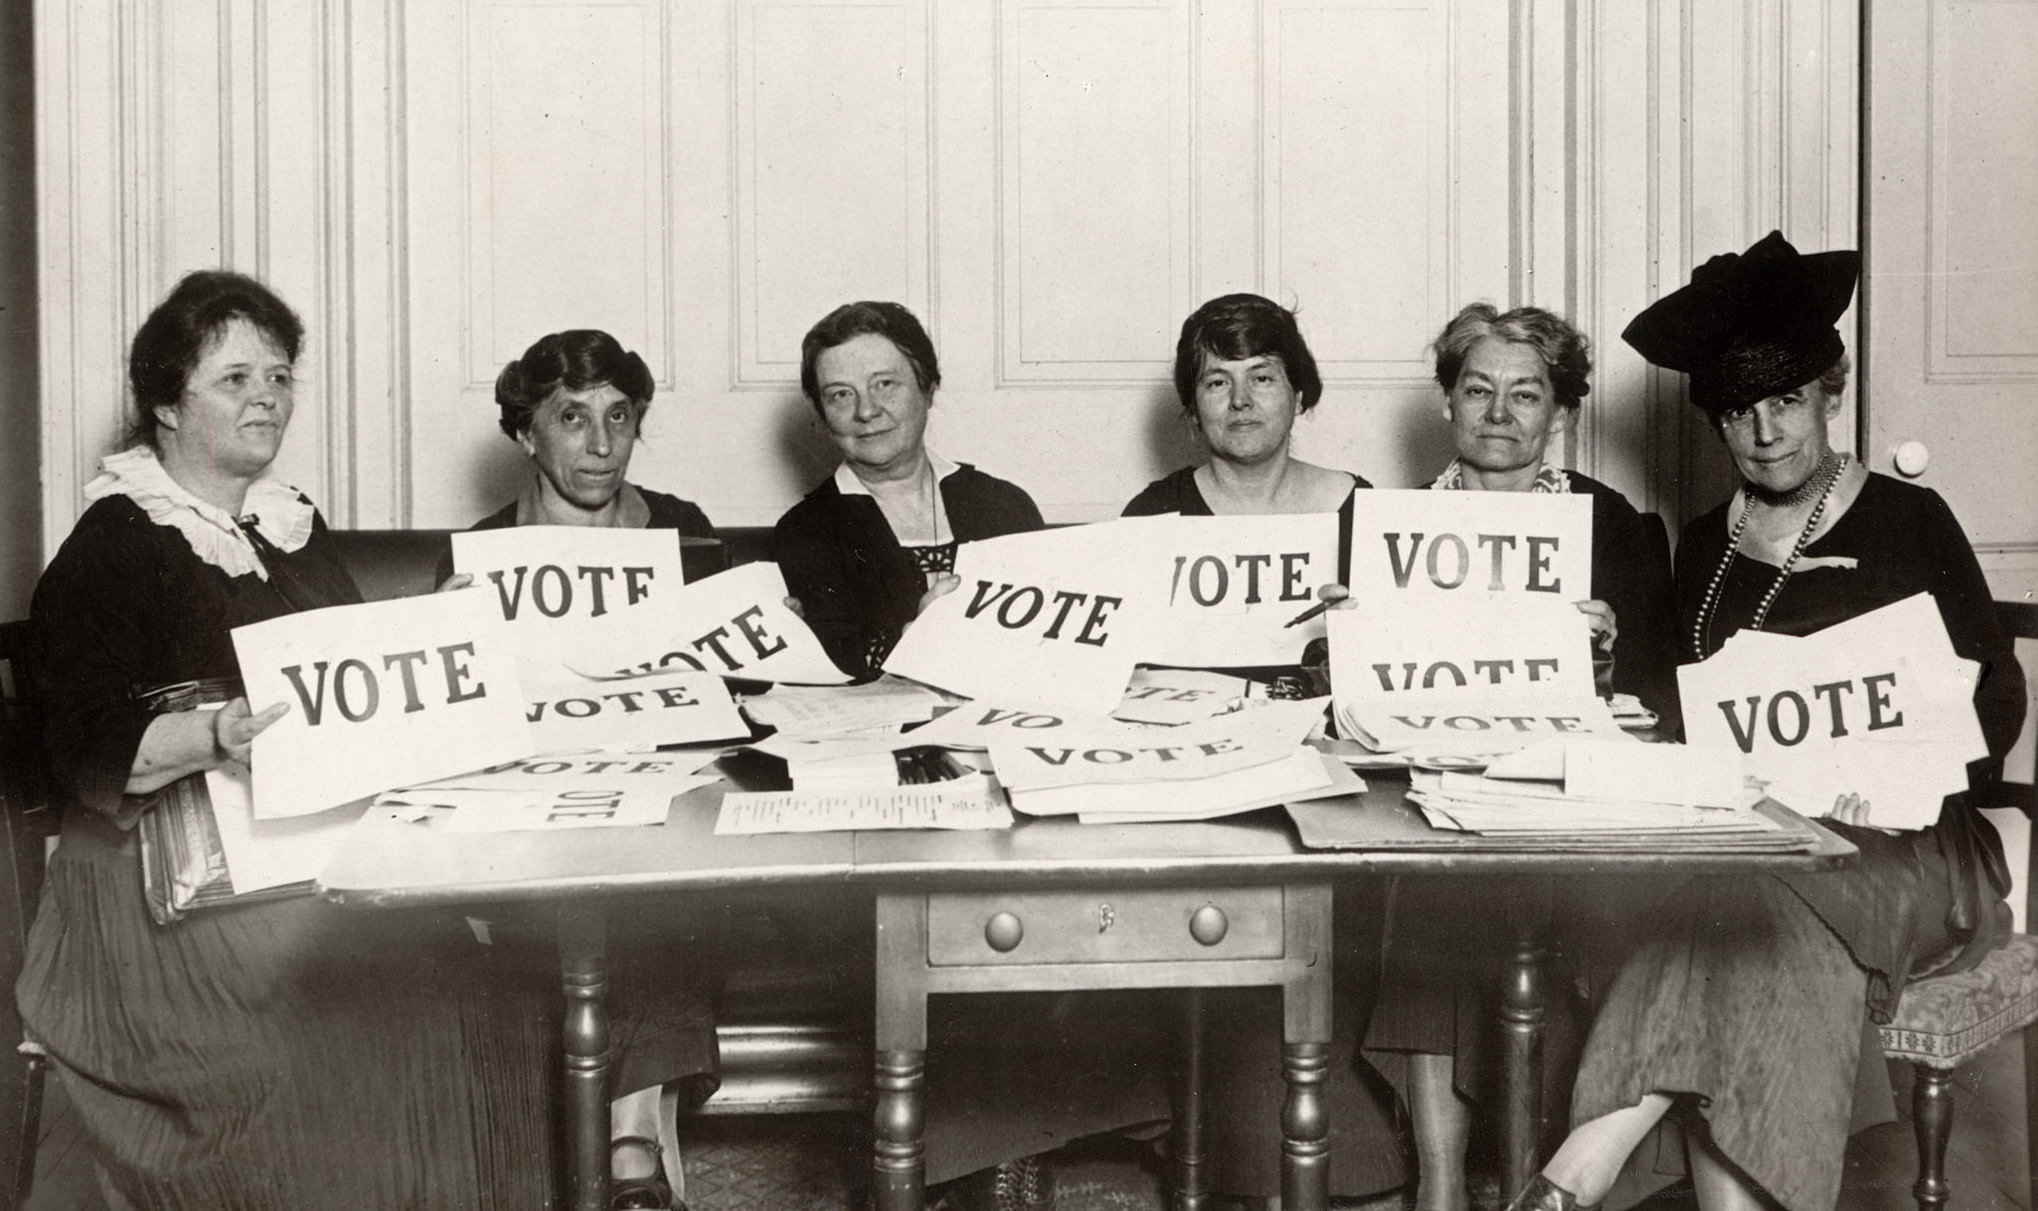 Early League members pose with 'Vote' signs